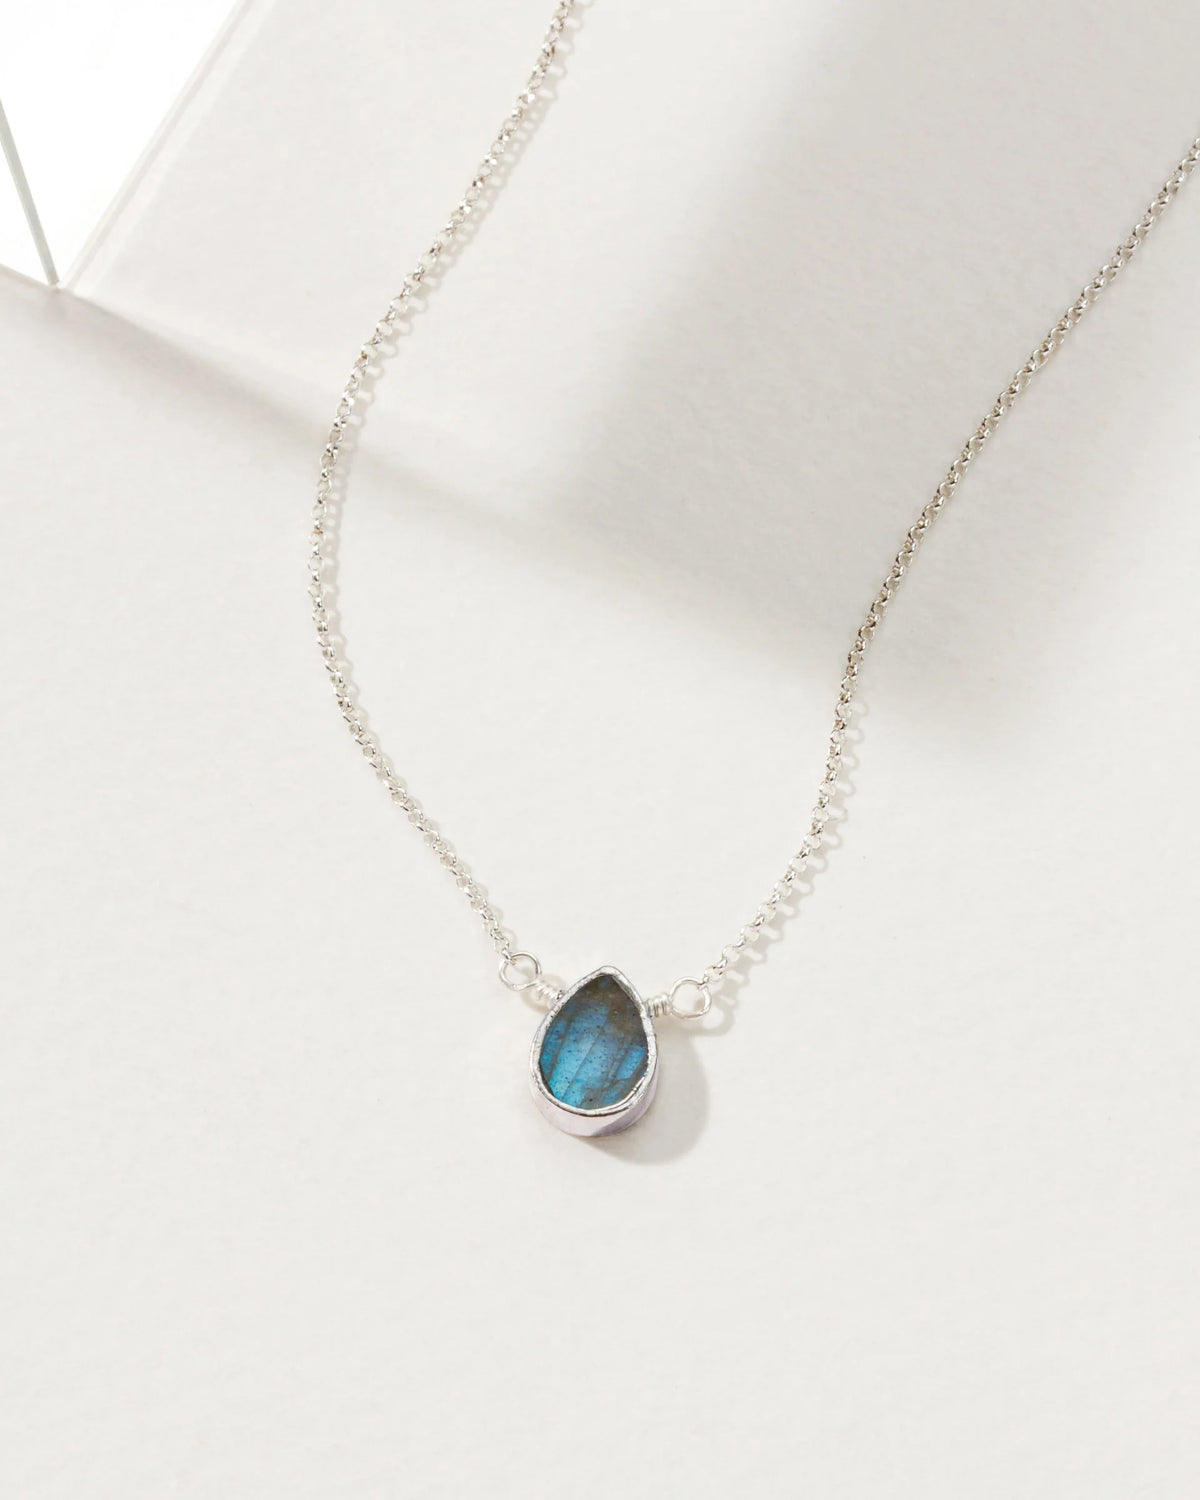 delicate gemstone necklace in silver plated brass and labradorite gemstone by luna norte jewelry